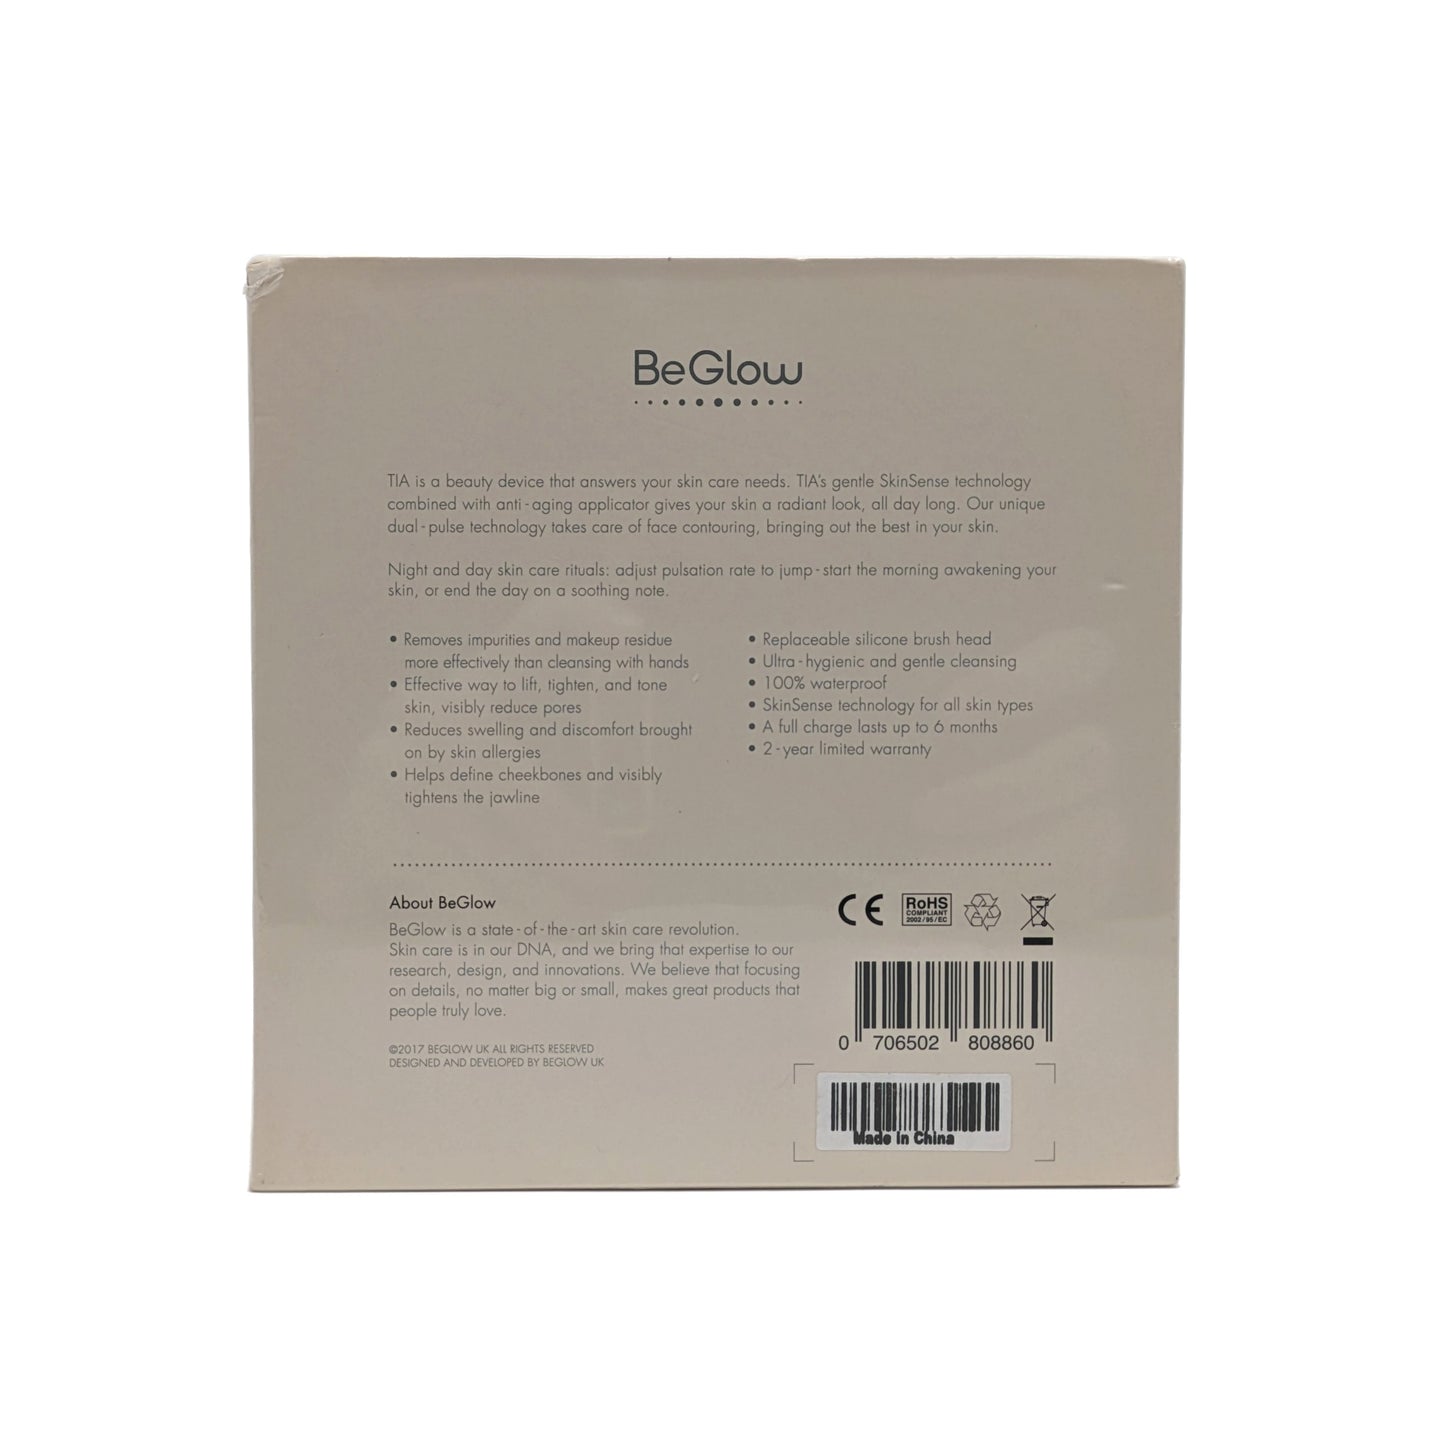 BeGlow TIA Facial Toning & Cleansing Sonic Device Black - Imperfect Box